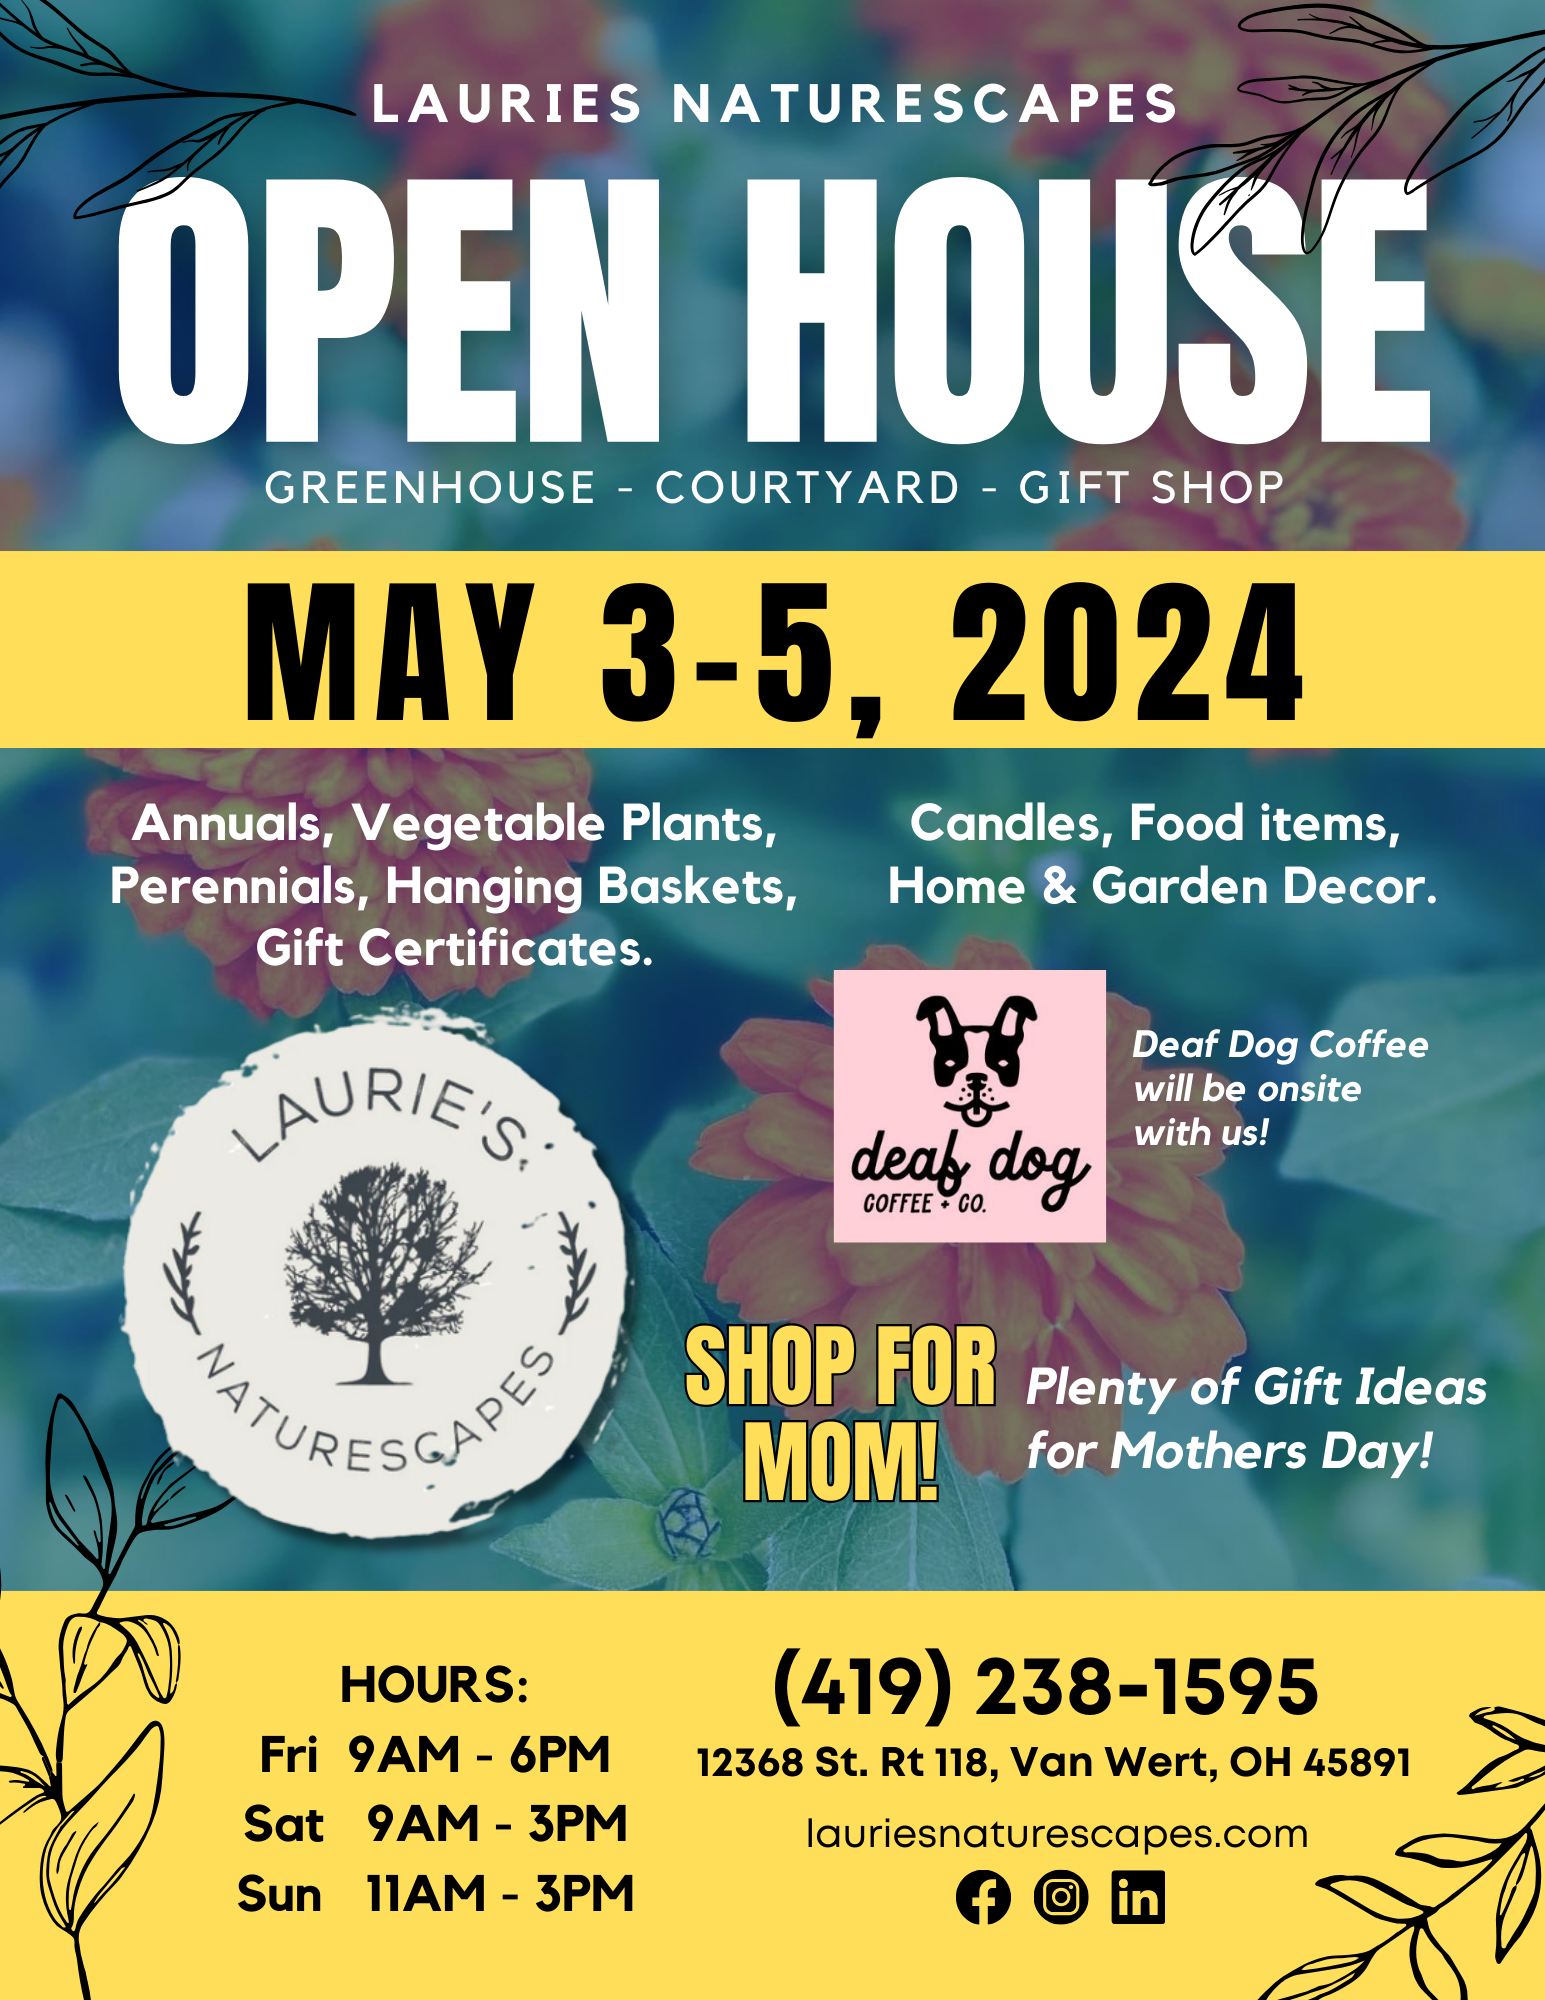 Laurie's Naturescapes Open House May 3-5, 2024. Located in Van Wert, OH 45891. Stop and shop for Mom!